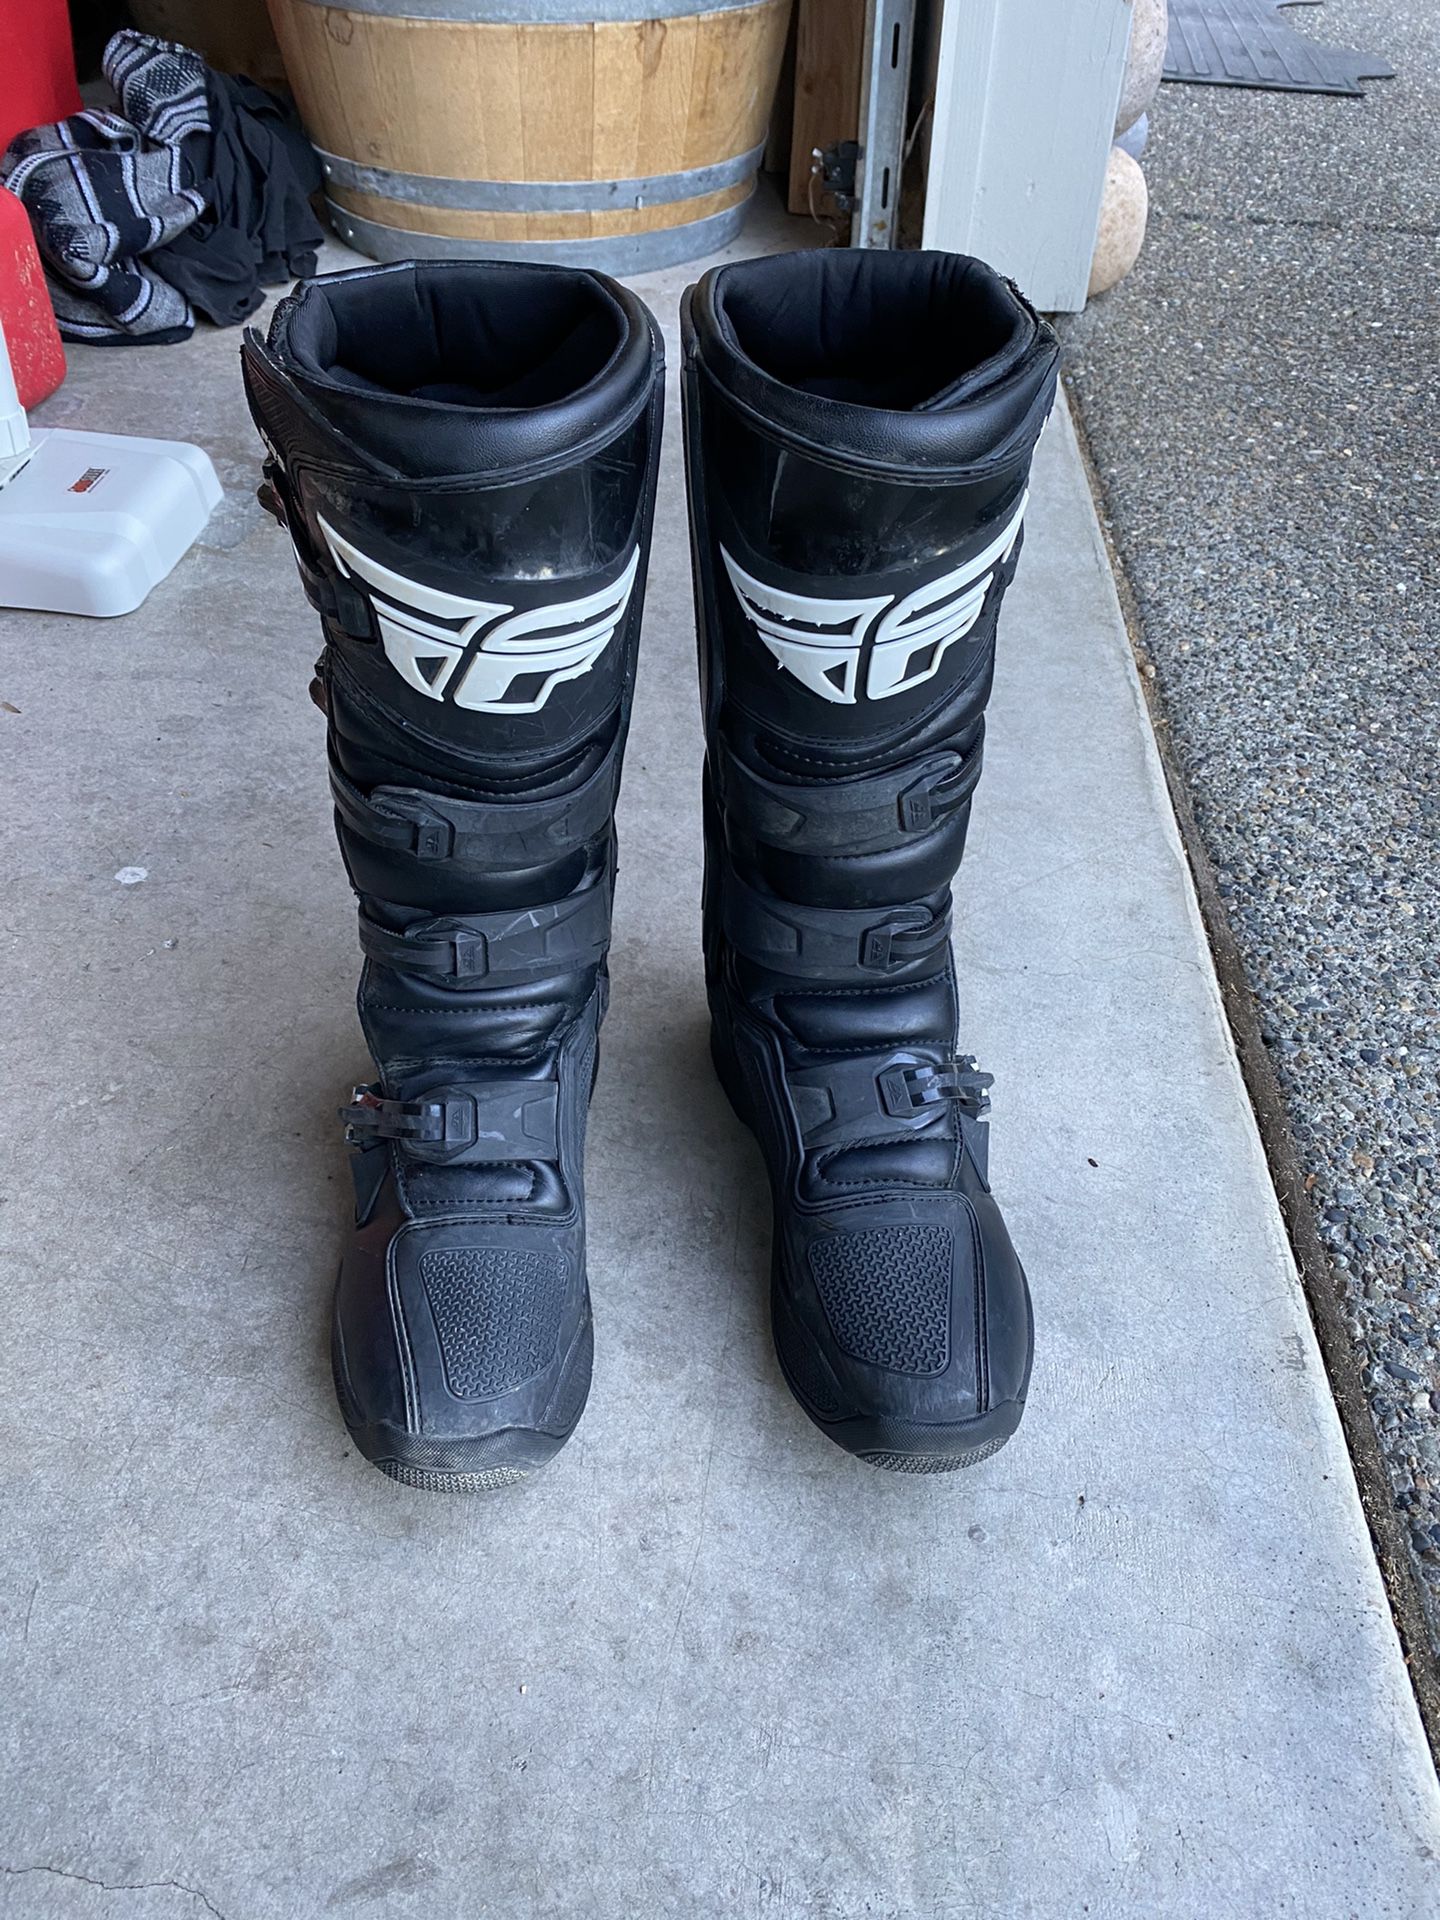 Fly FR5 boots